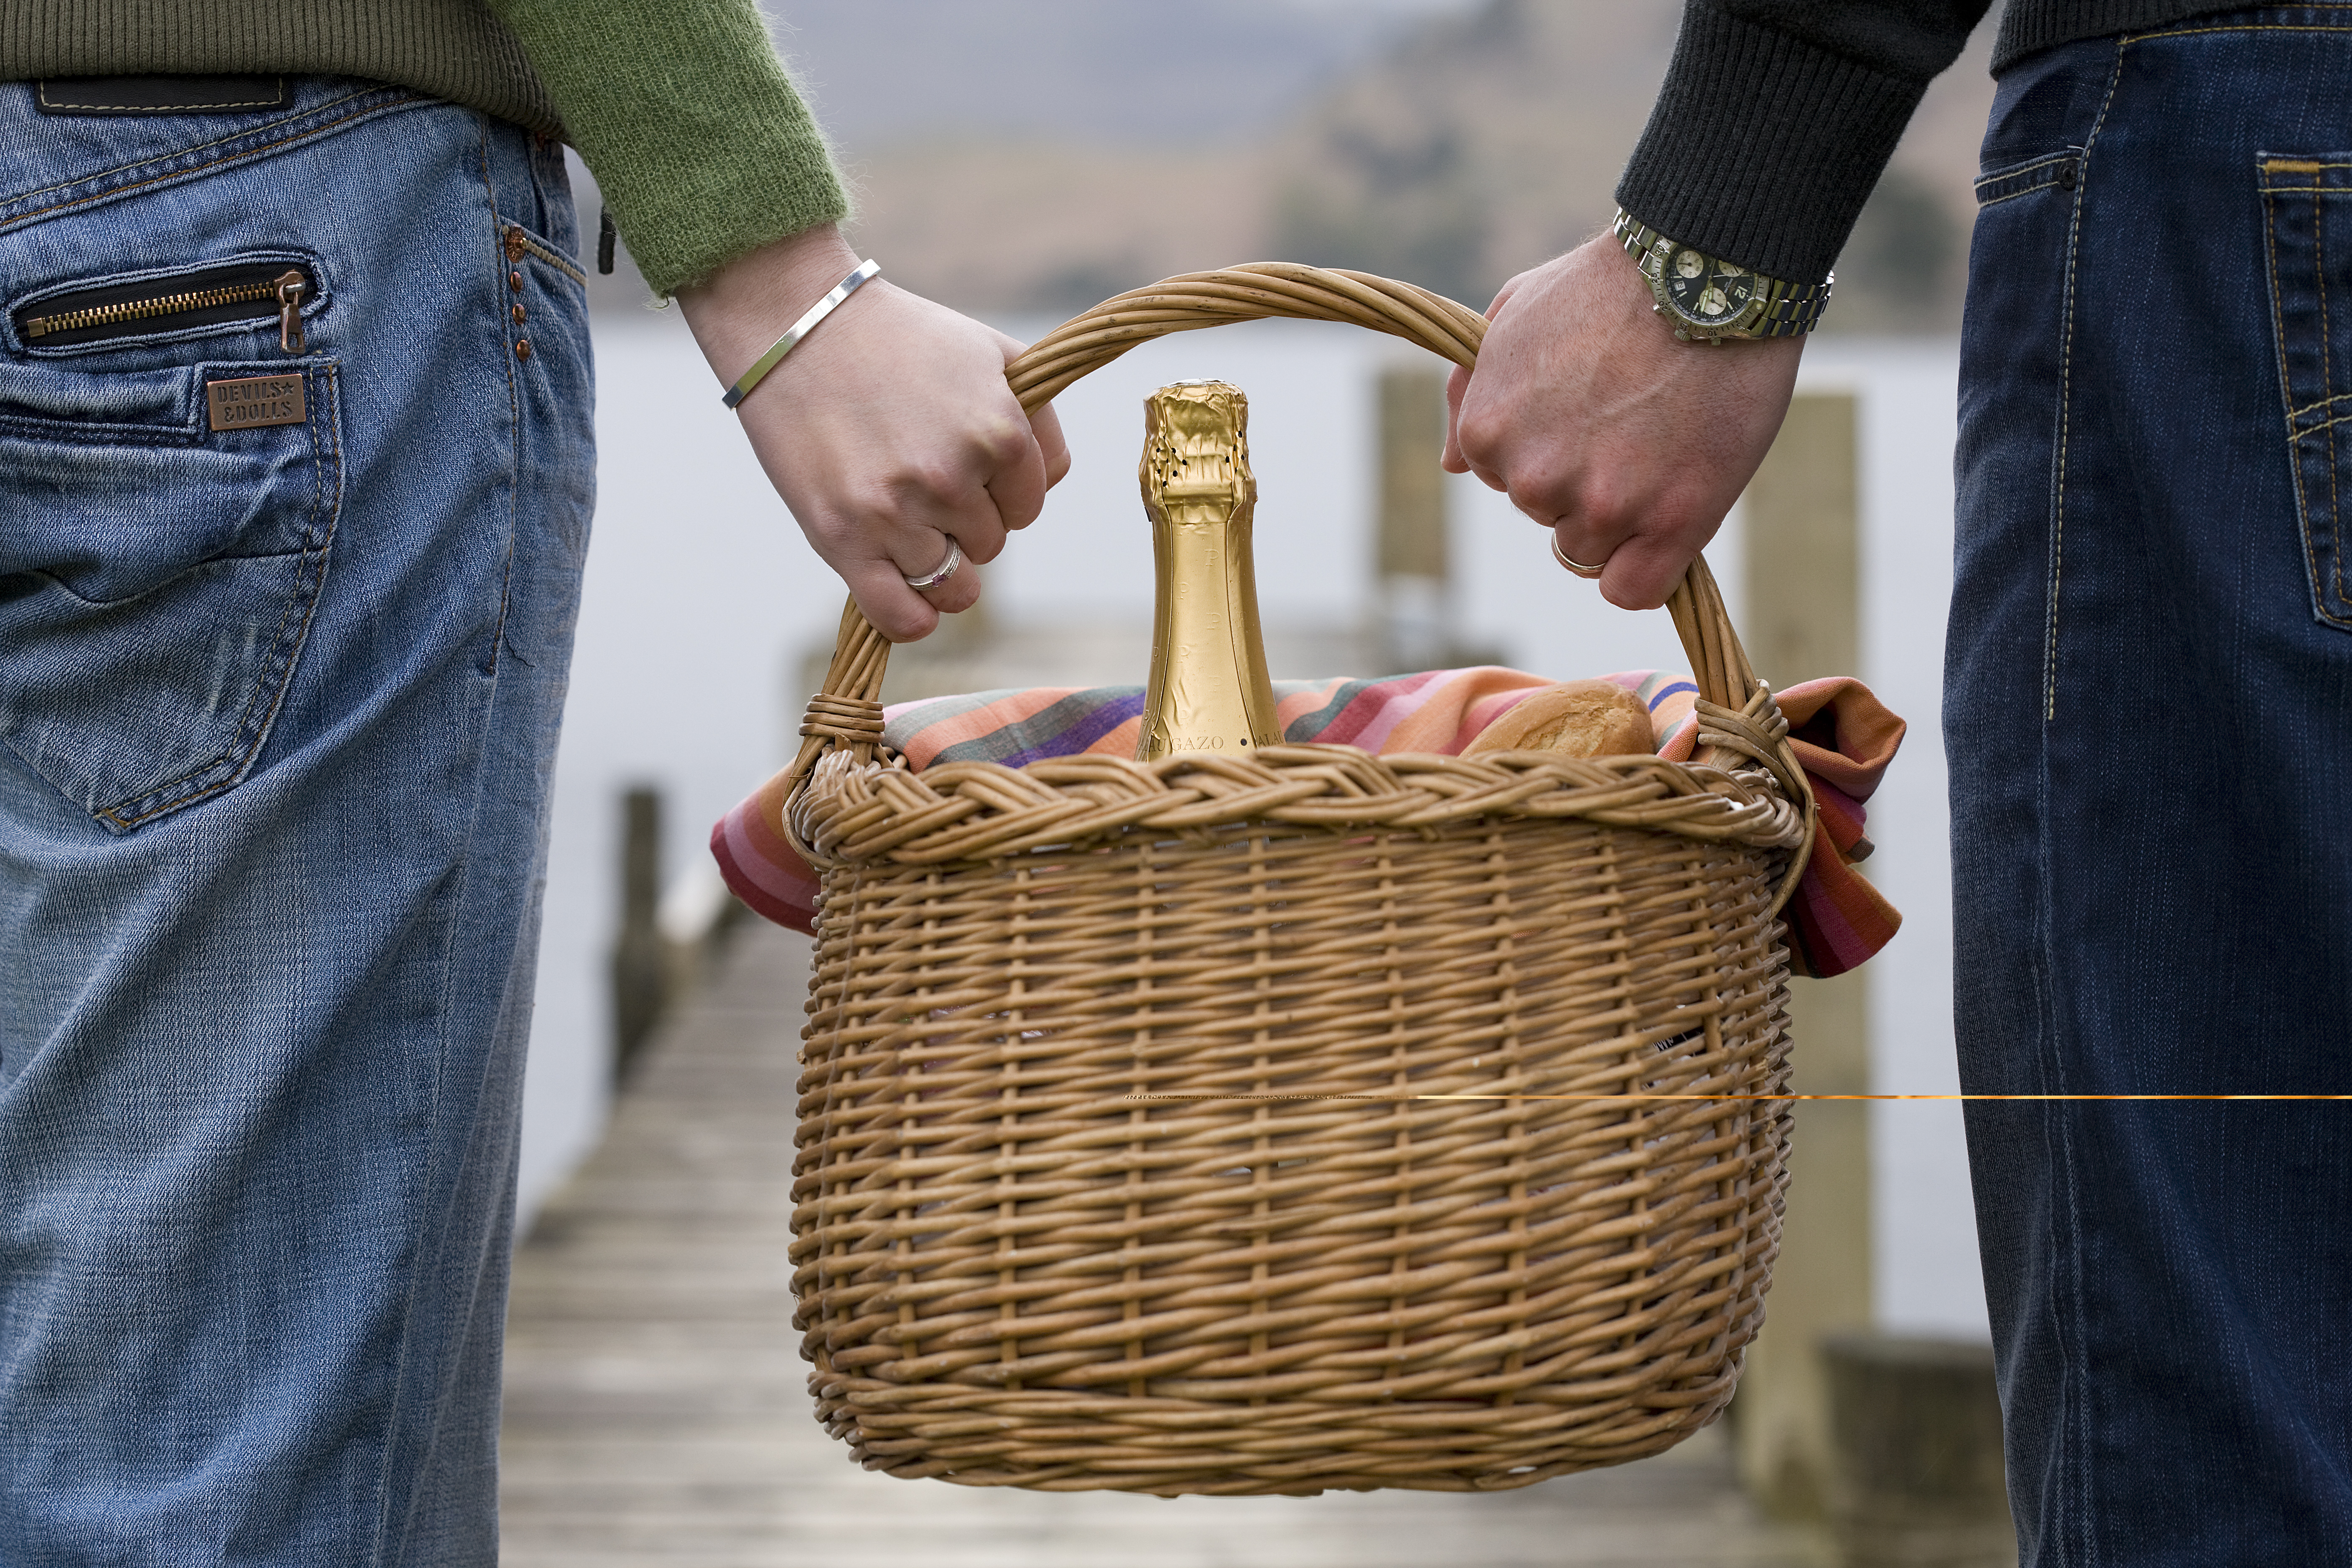 Going on a picnic at Ullswater. Make an occasion of it!